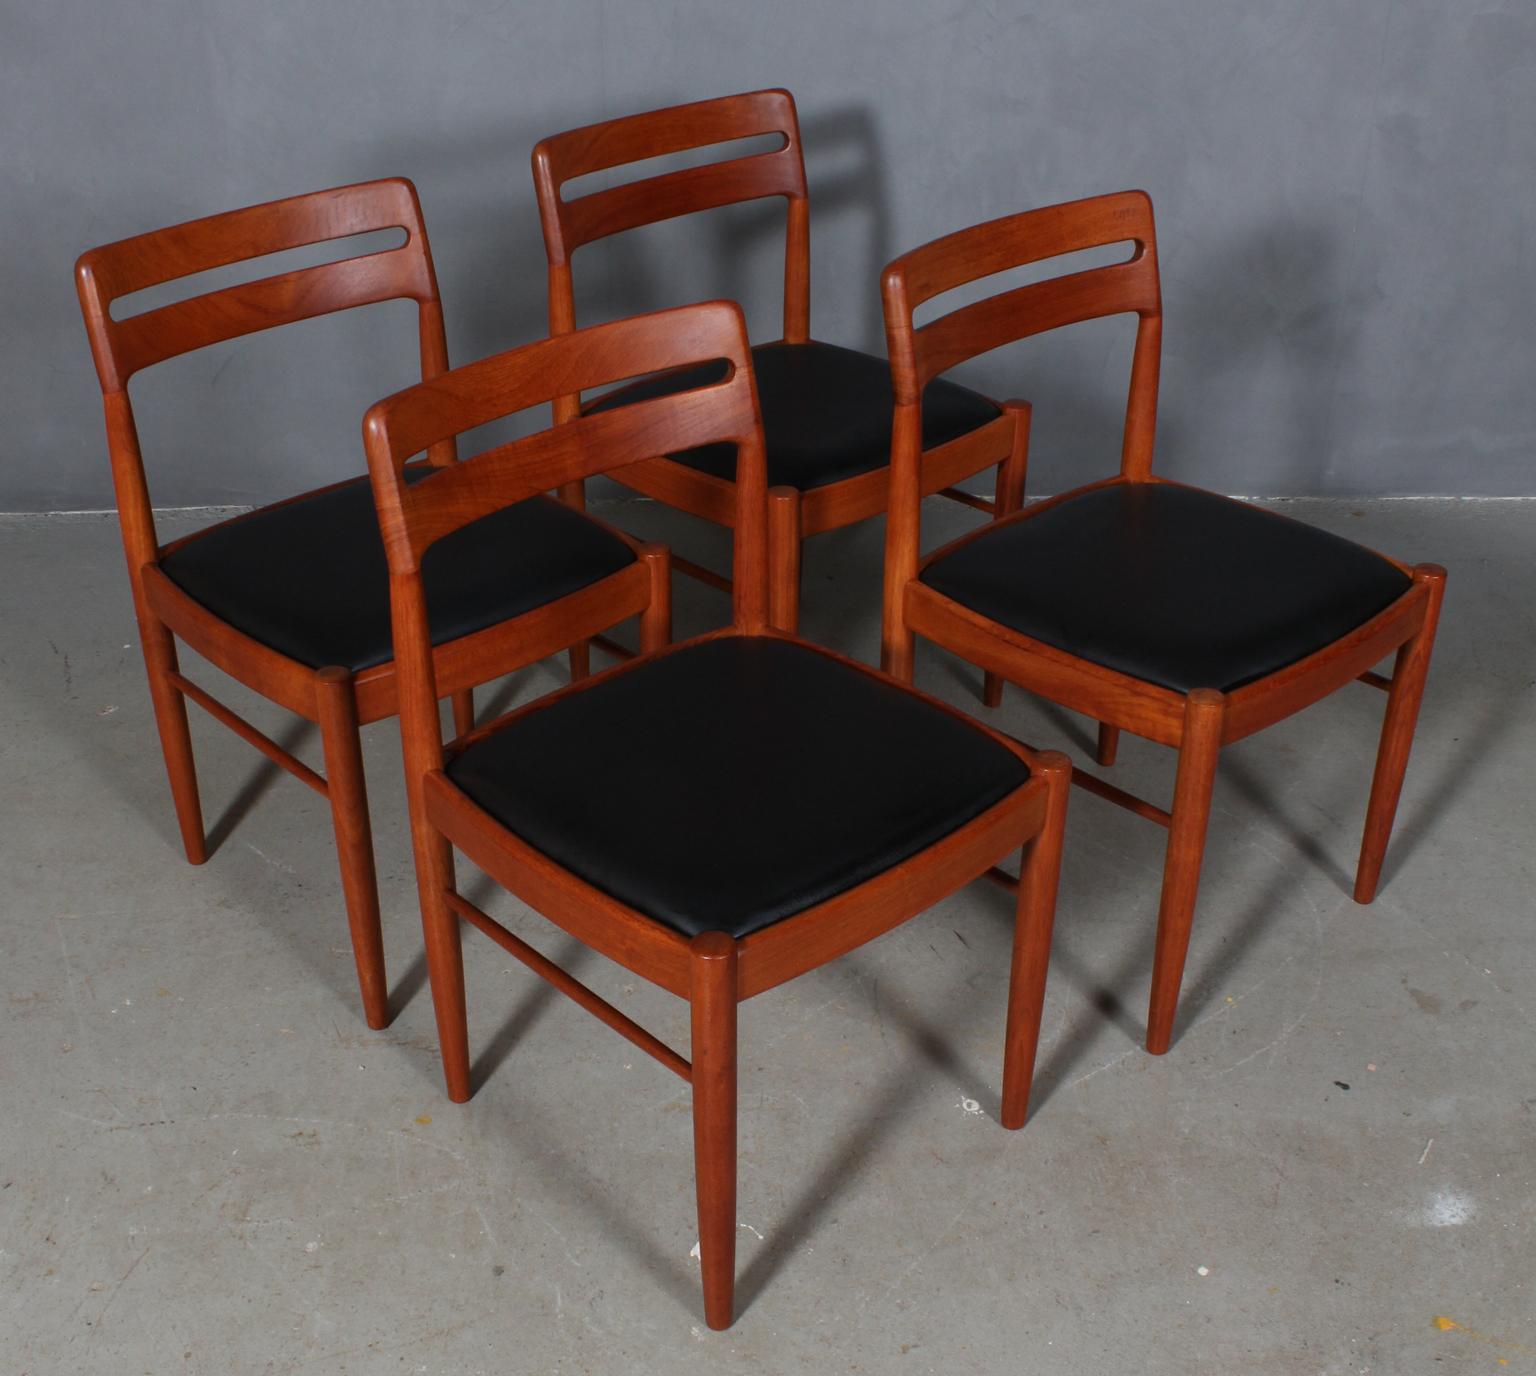 Henry Walter Klein four dining chairs in solid teak.

New upholstered with black aniline leather.

Made by Bramin, 1960s.